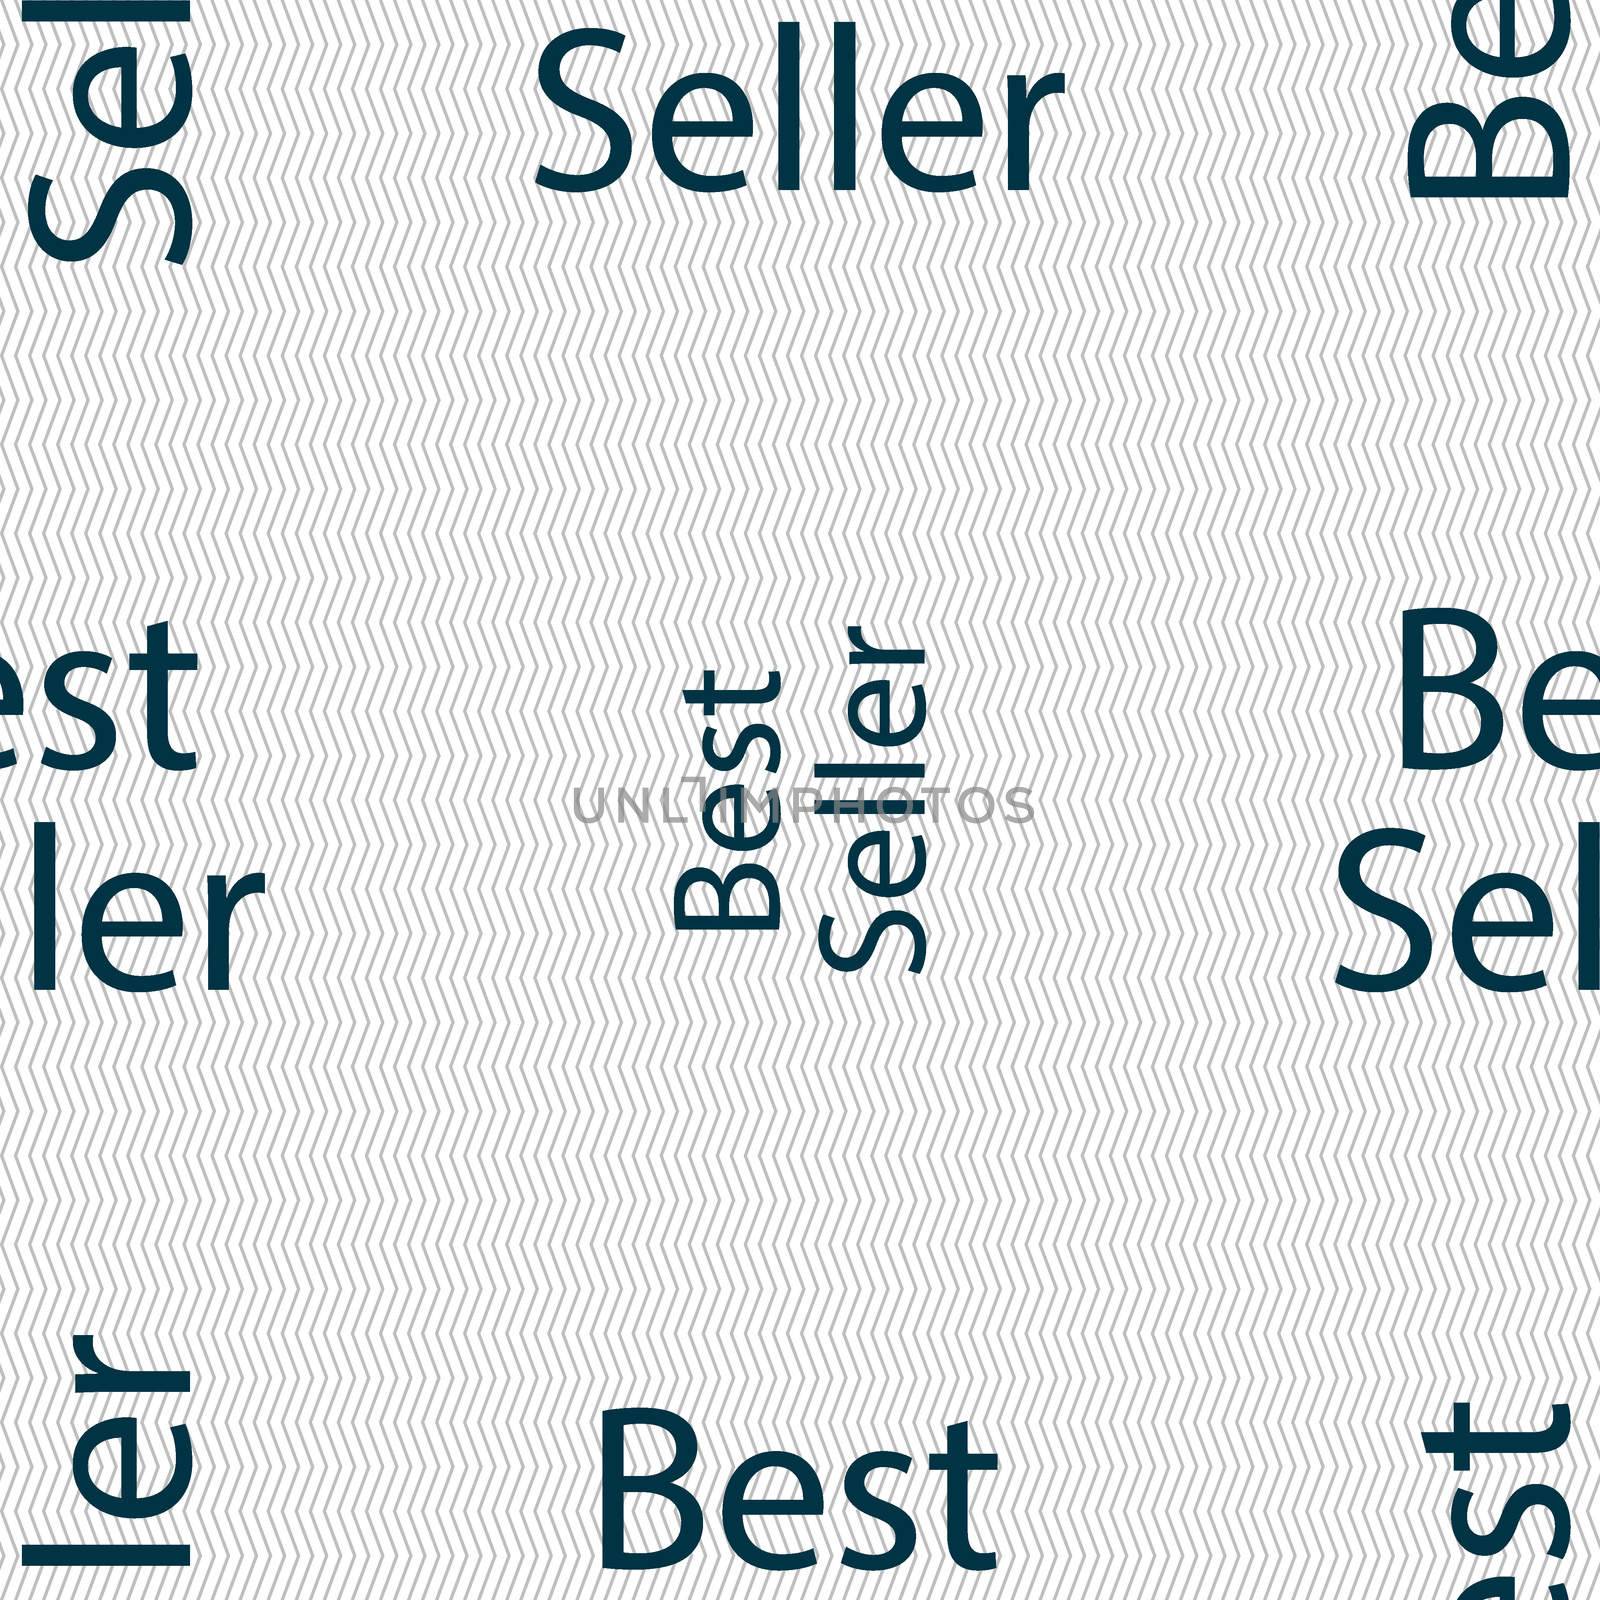 Best seller sign icon. Best seller award symbol. Seamless abstract background with geometric shapes. illustration